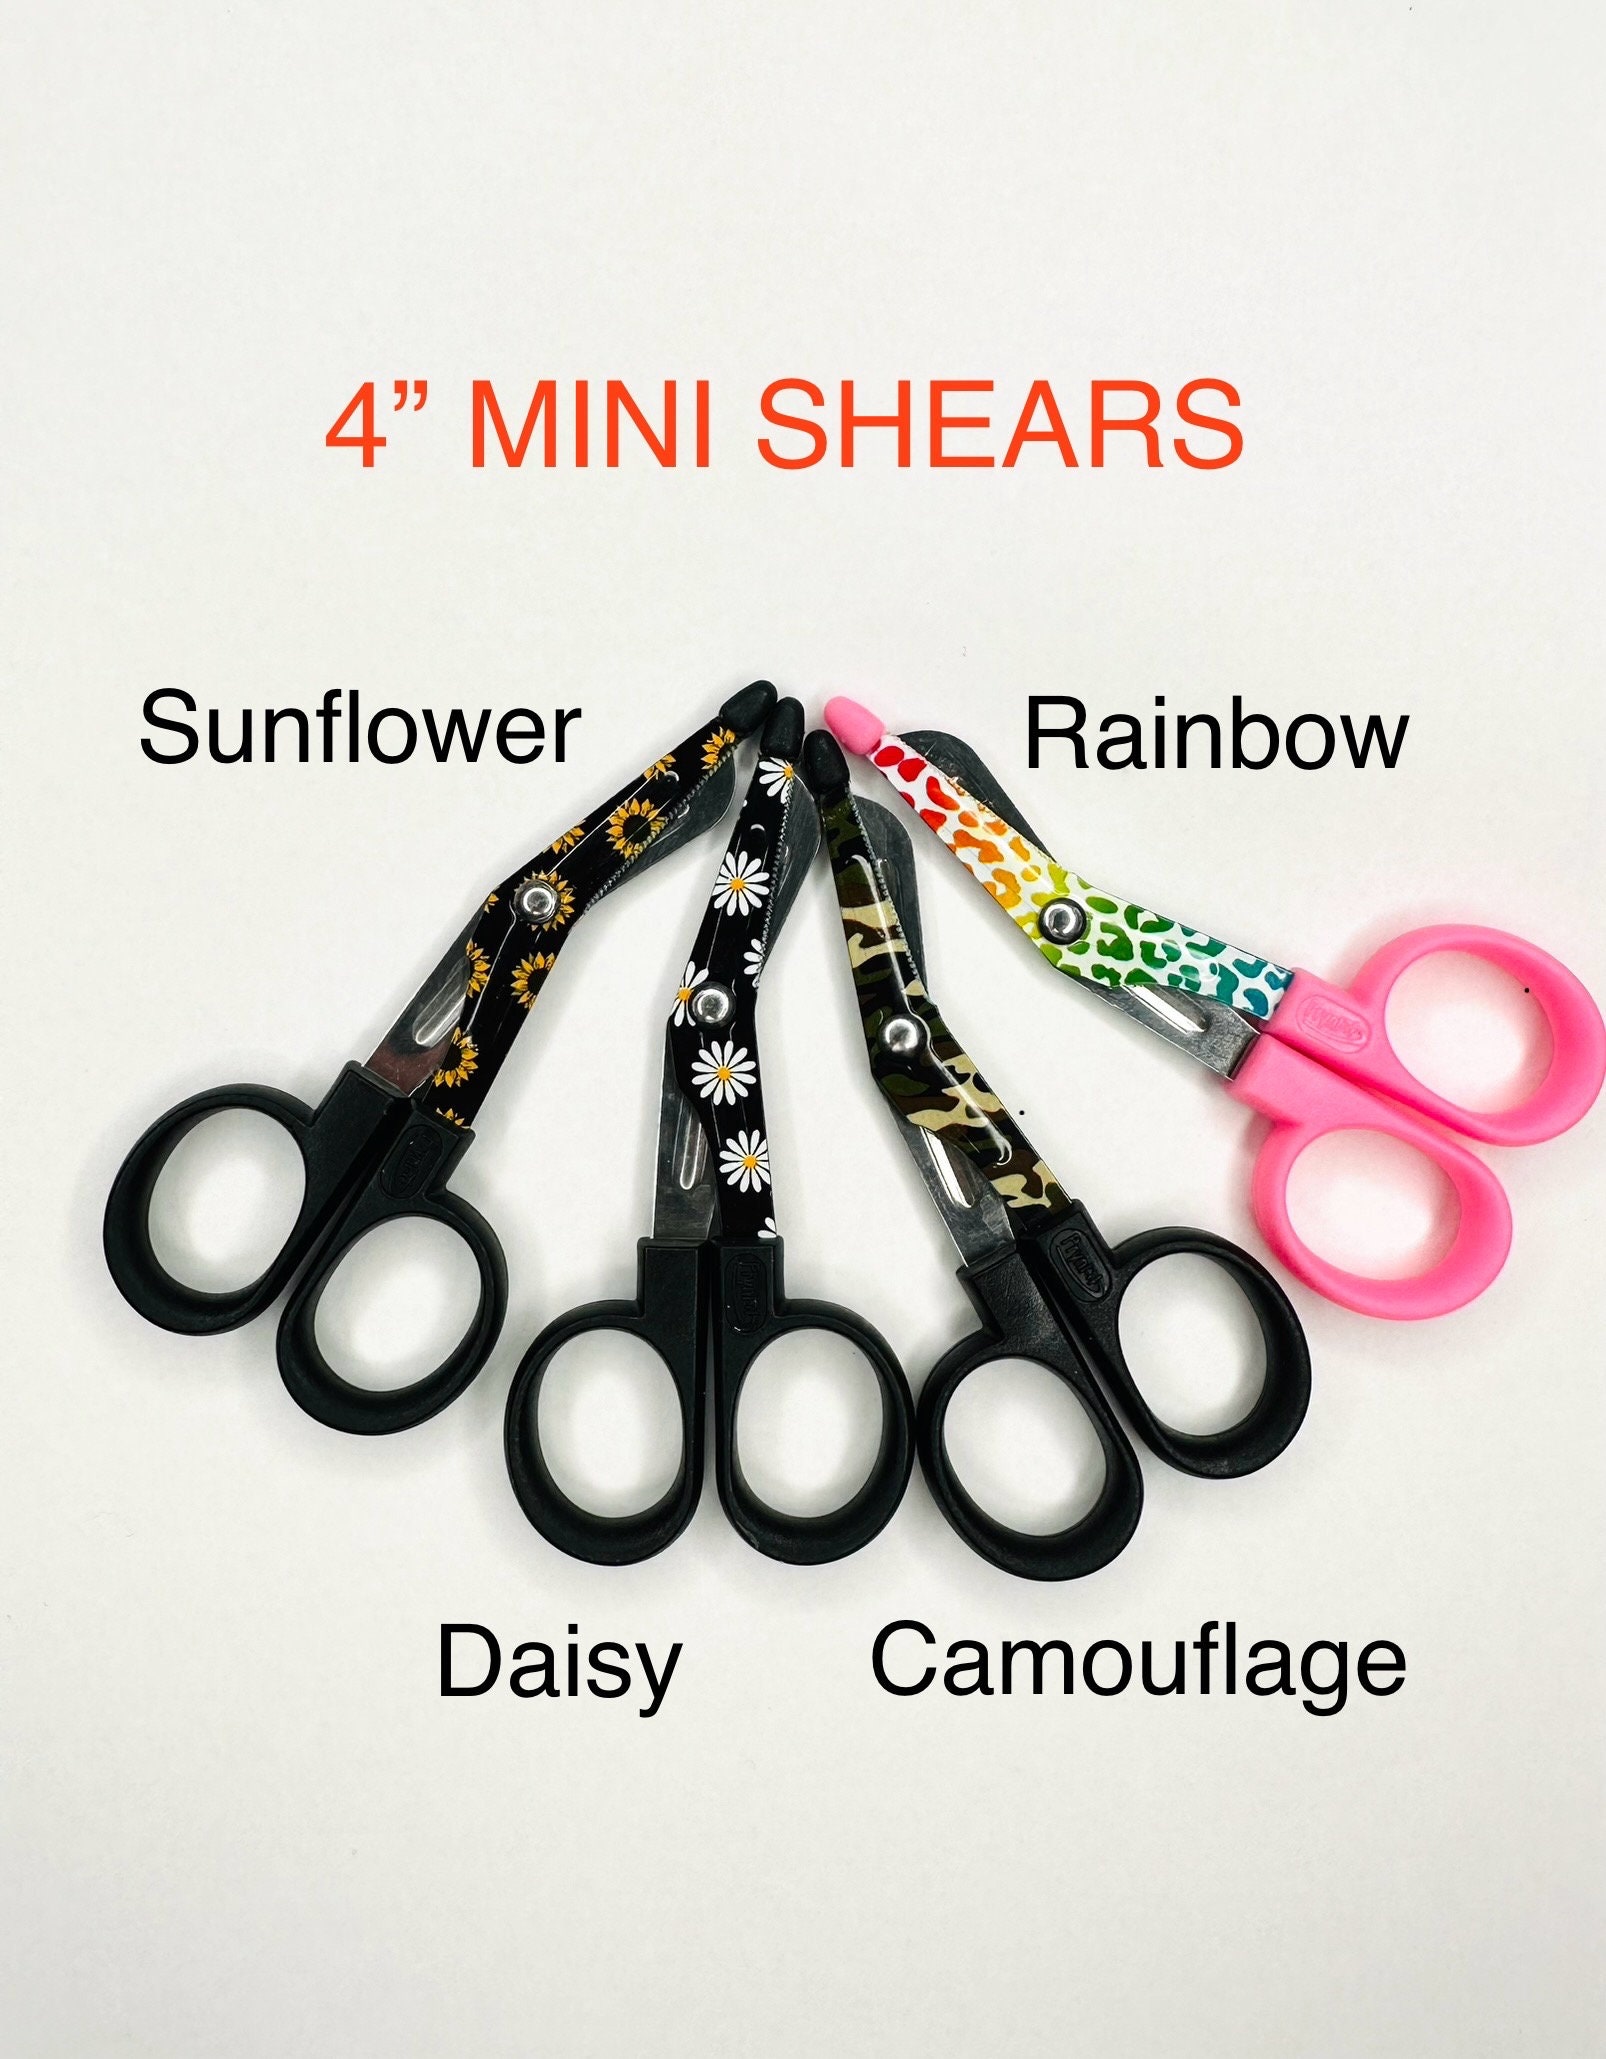 Hummingbird 4-in-1 Medical Scissors - Compact Pocket Size Trauma Shears  with Badge Reels for Nurses, Students, Respiratory Therapists,  Veterinarians